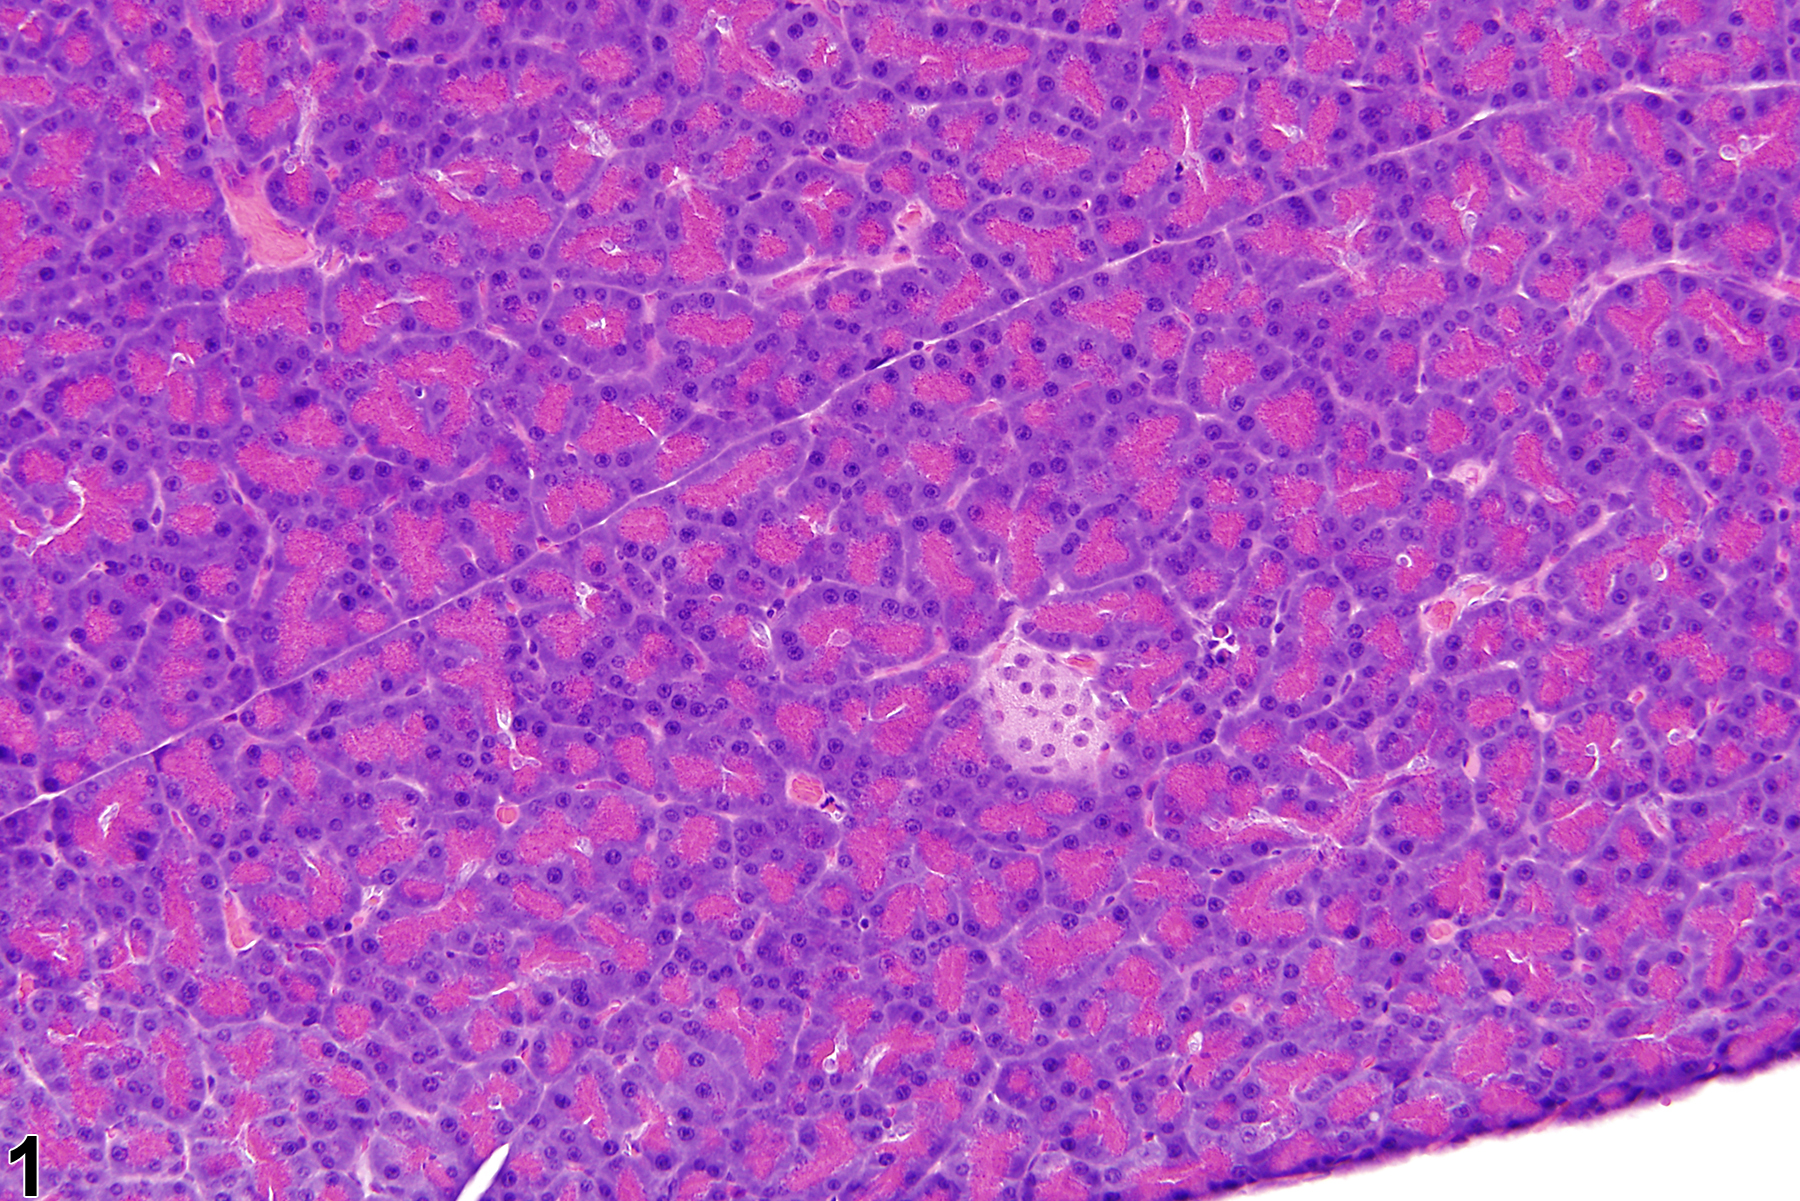 Image of hypoplasia in the pancreatic islet from a female F344/N rat in a chronic study